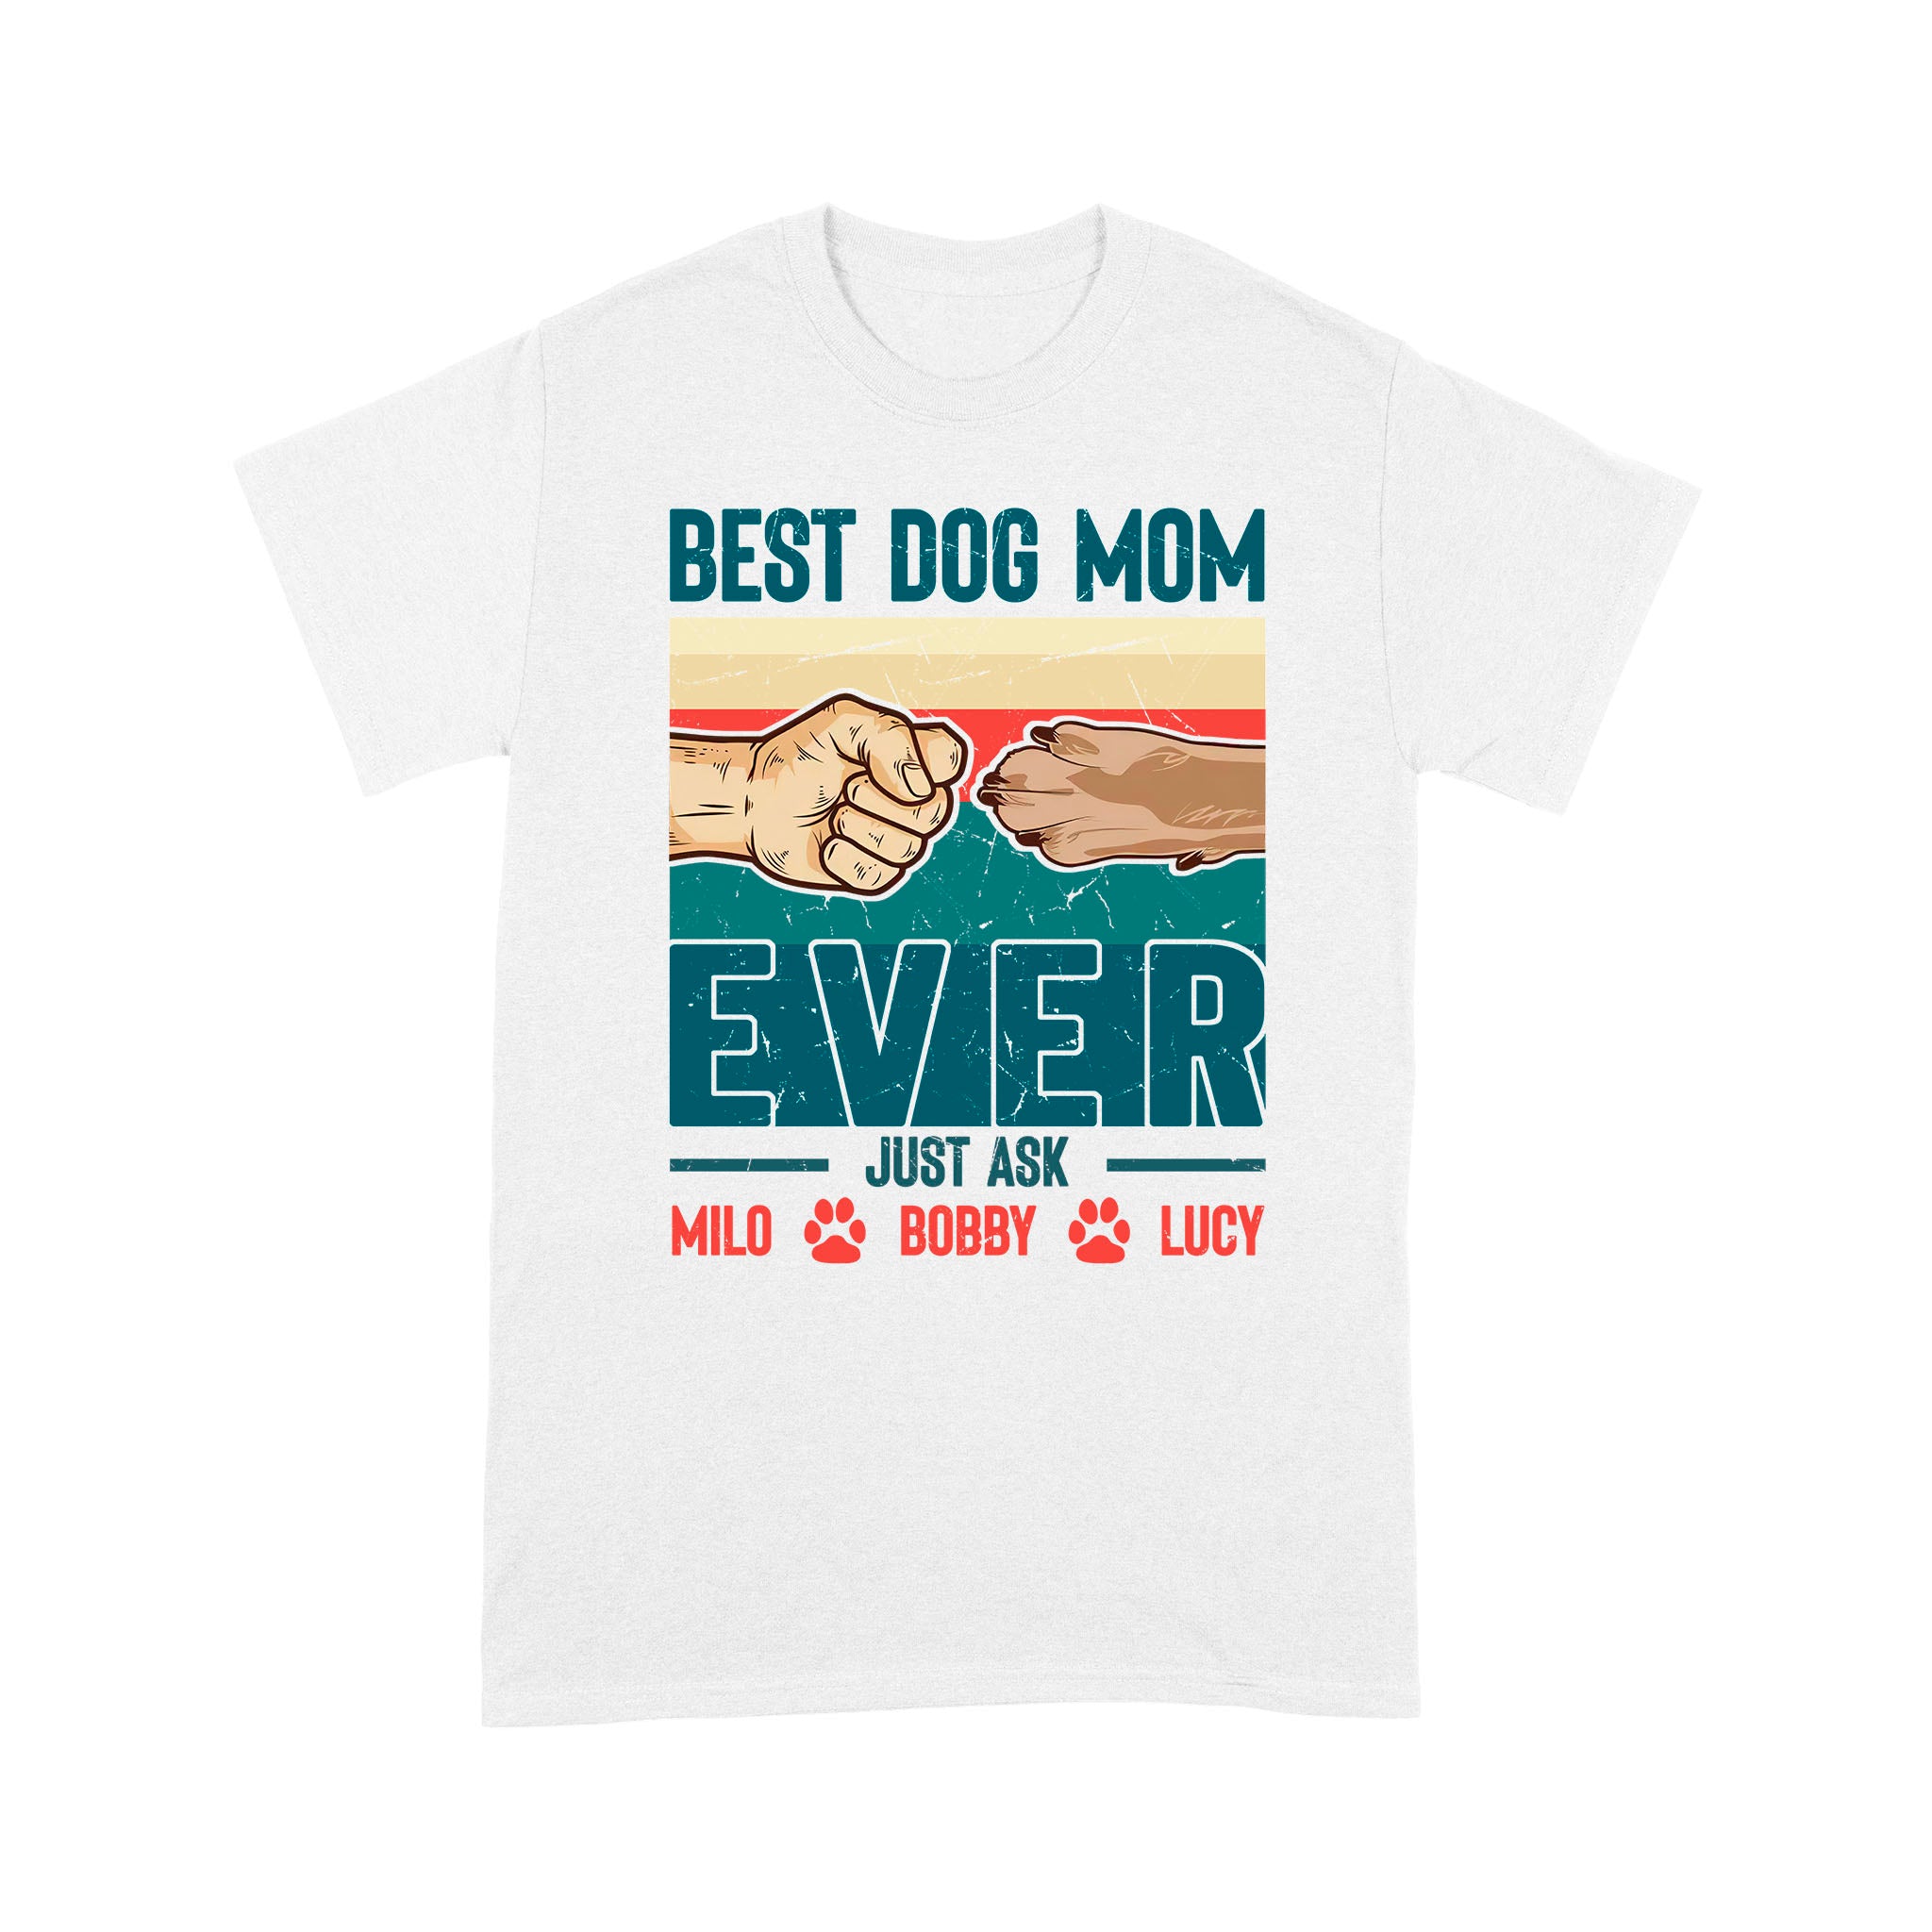 Best Dog Mom Ever - Cute T-Shirt for Dog Mom, Custom Dogs Name, Mothers Day, Christmas Gift| NTS210M